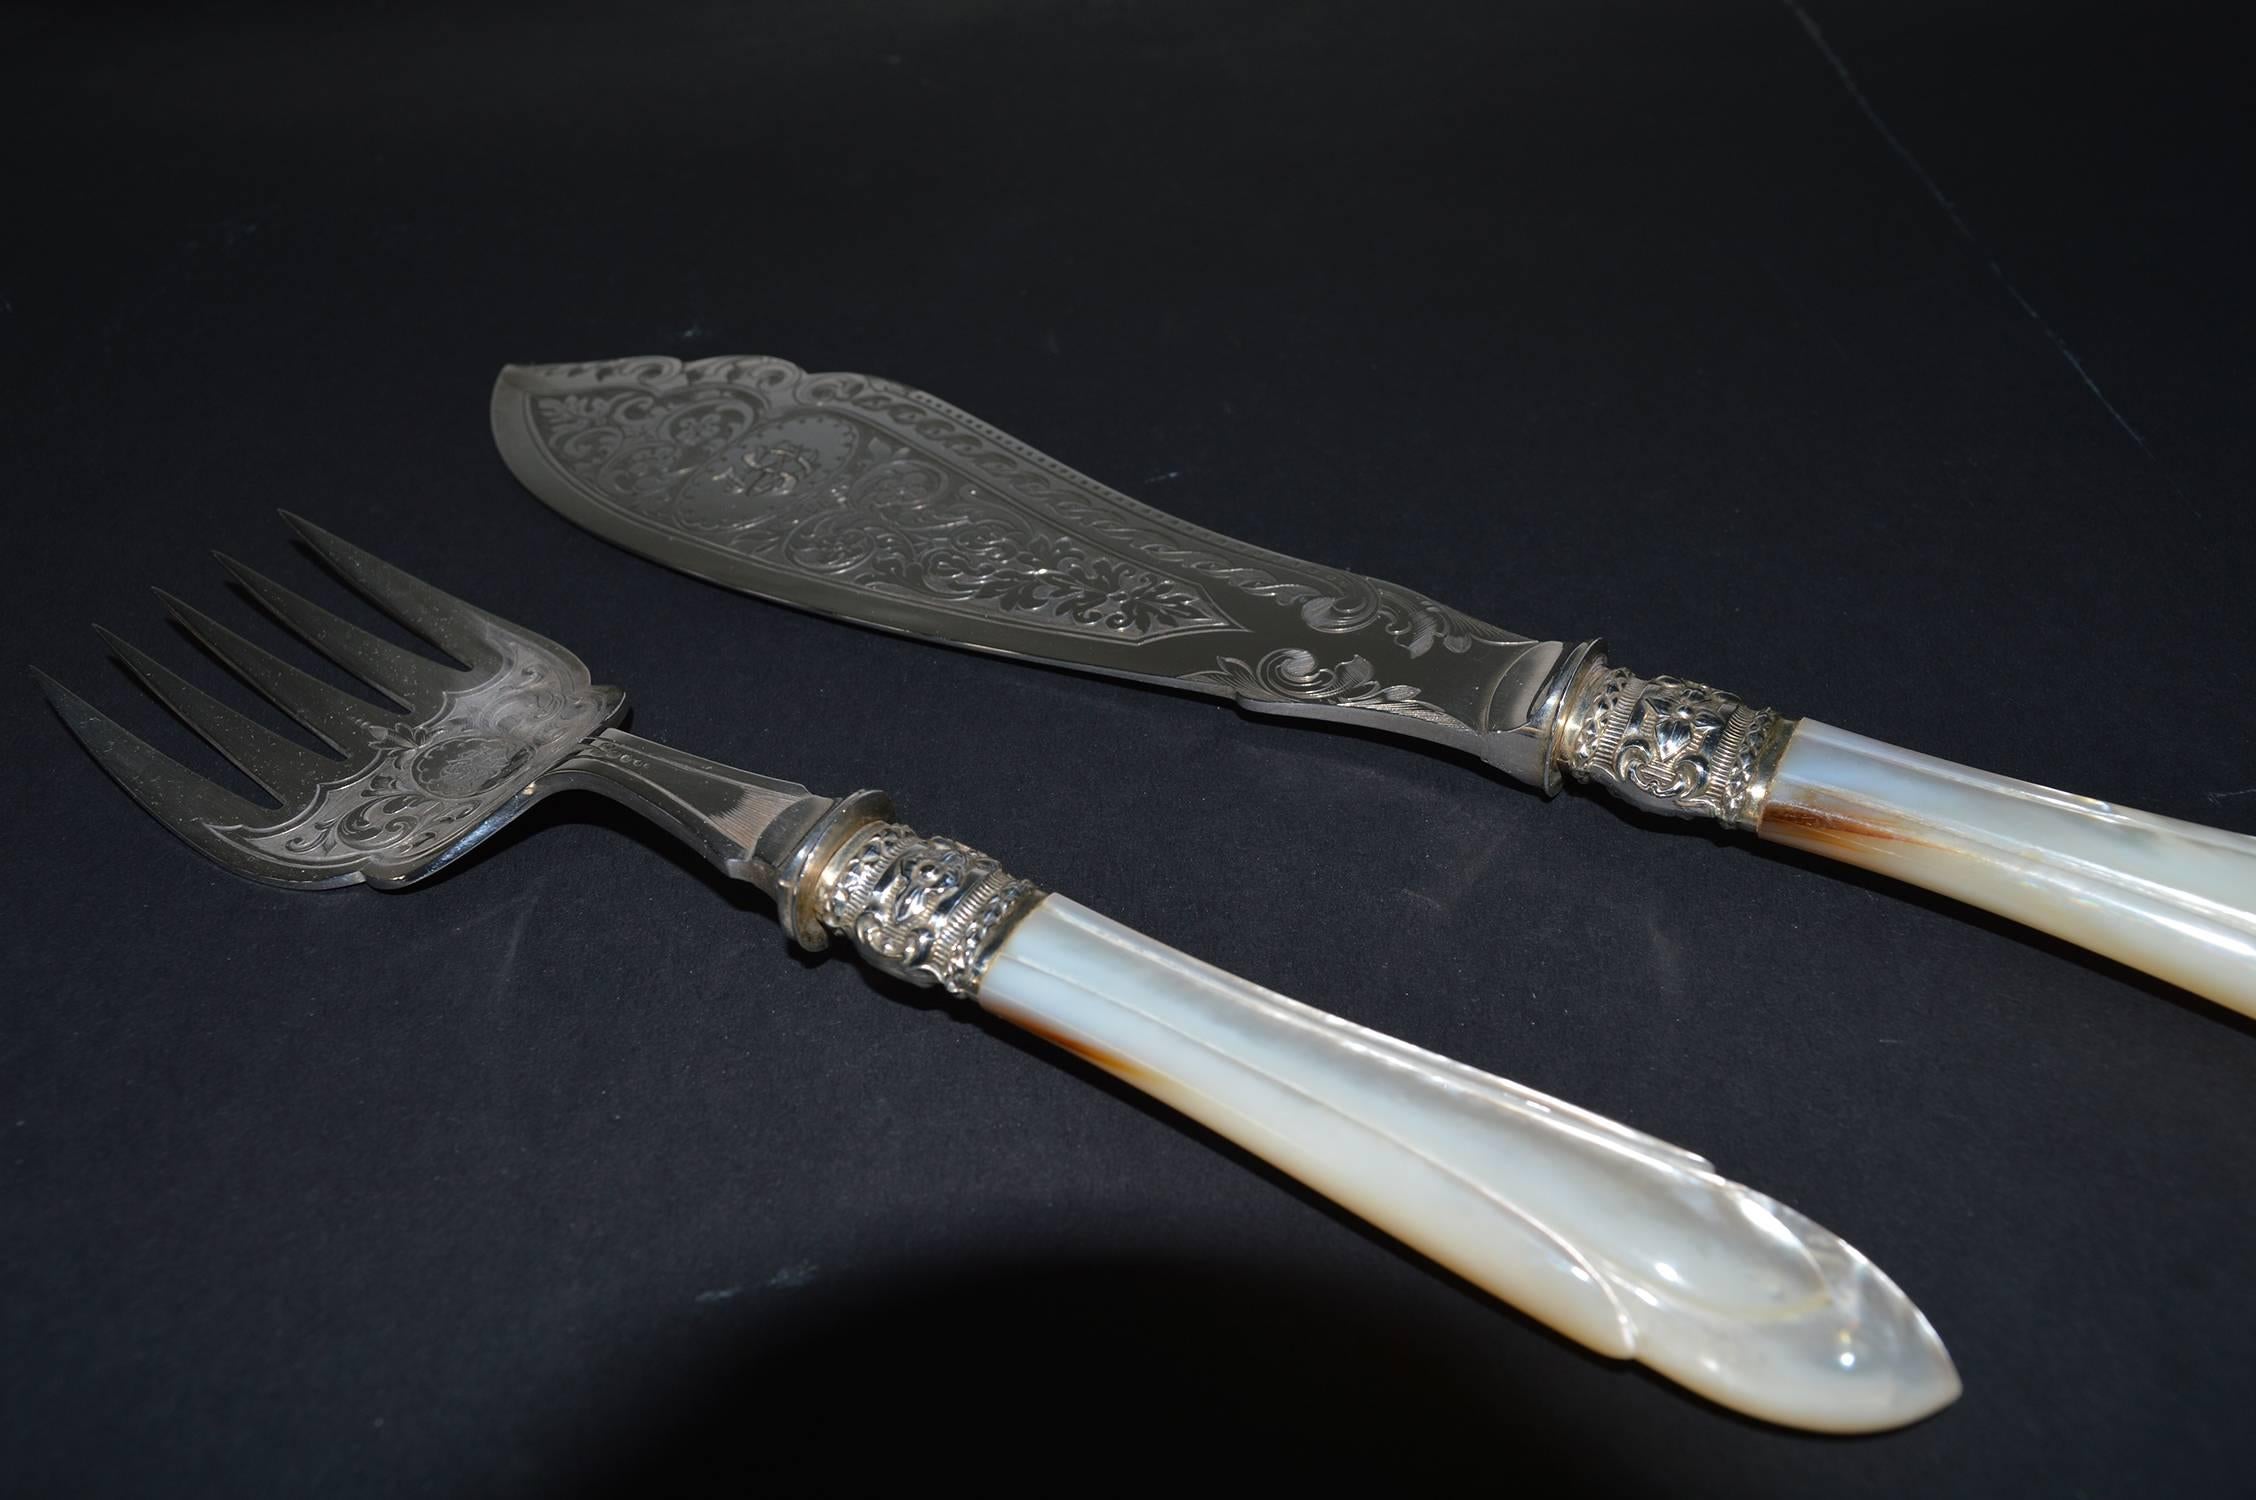 
Exceptional quality fish servers.

Carved mother-of-pearl and the finest engraving on the metal parts.

Beautiful ownership initials engraved on both pieces.

Sheffield maker of L.B. & S marked on the back of the knife.

The measurements